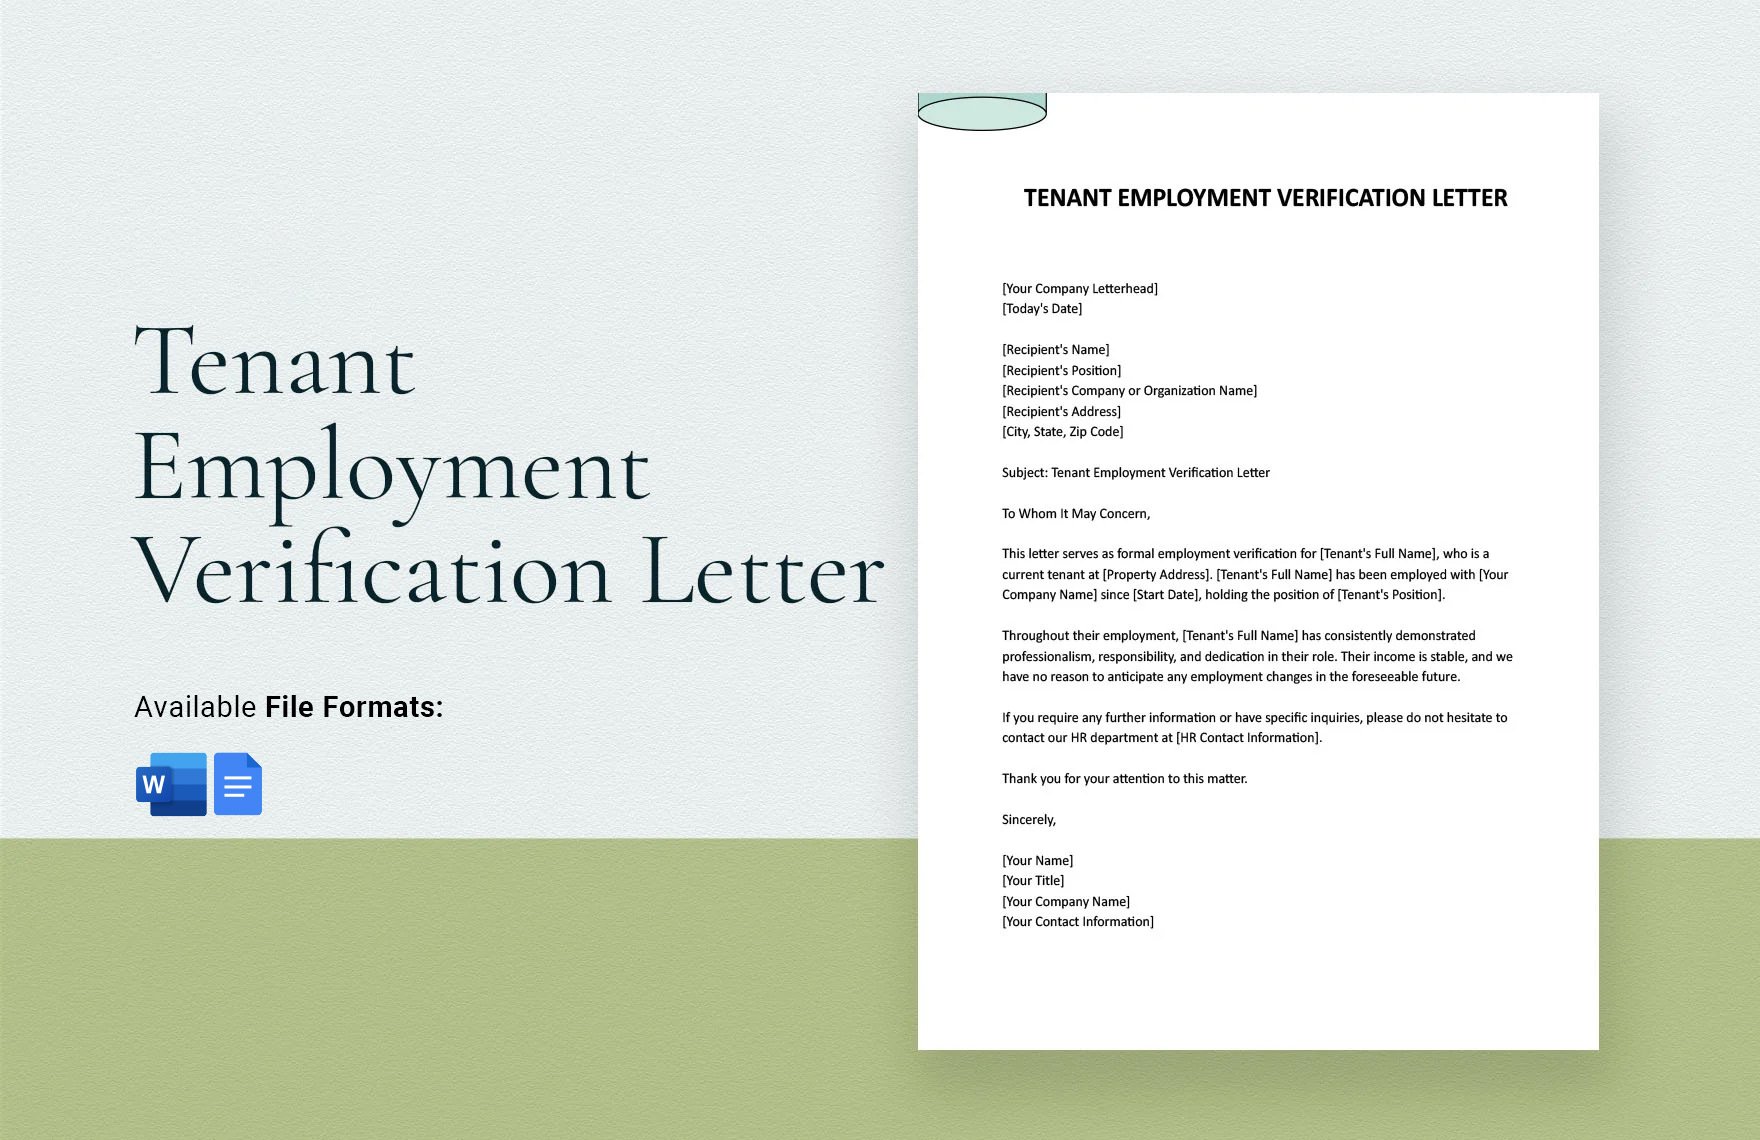 Free Tenant Employment Verification Letter in Word, Google Docs